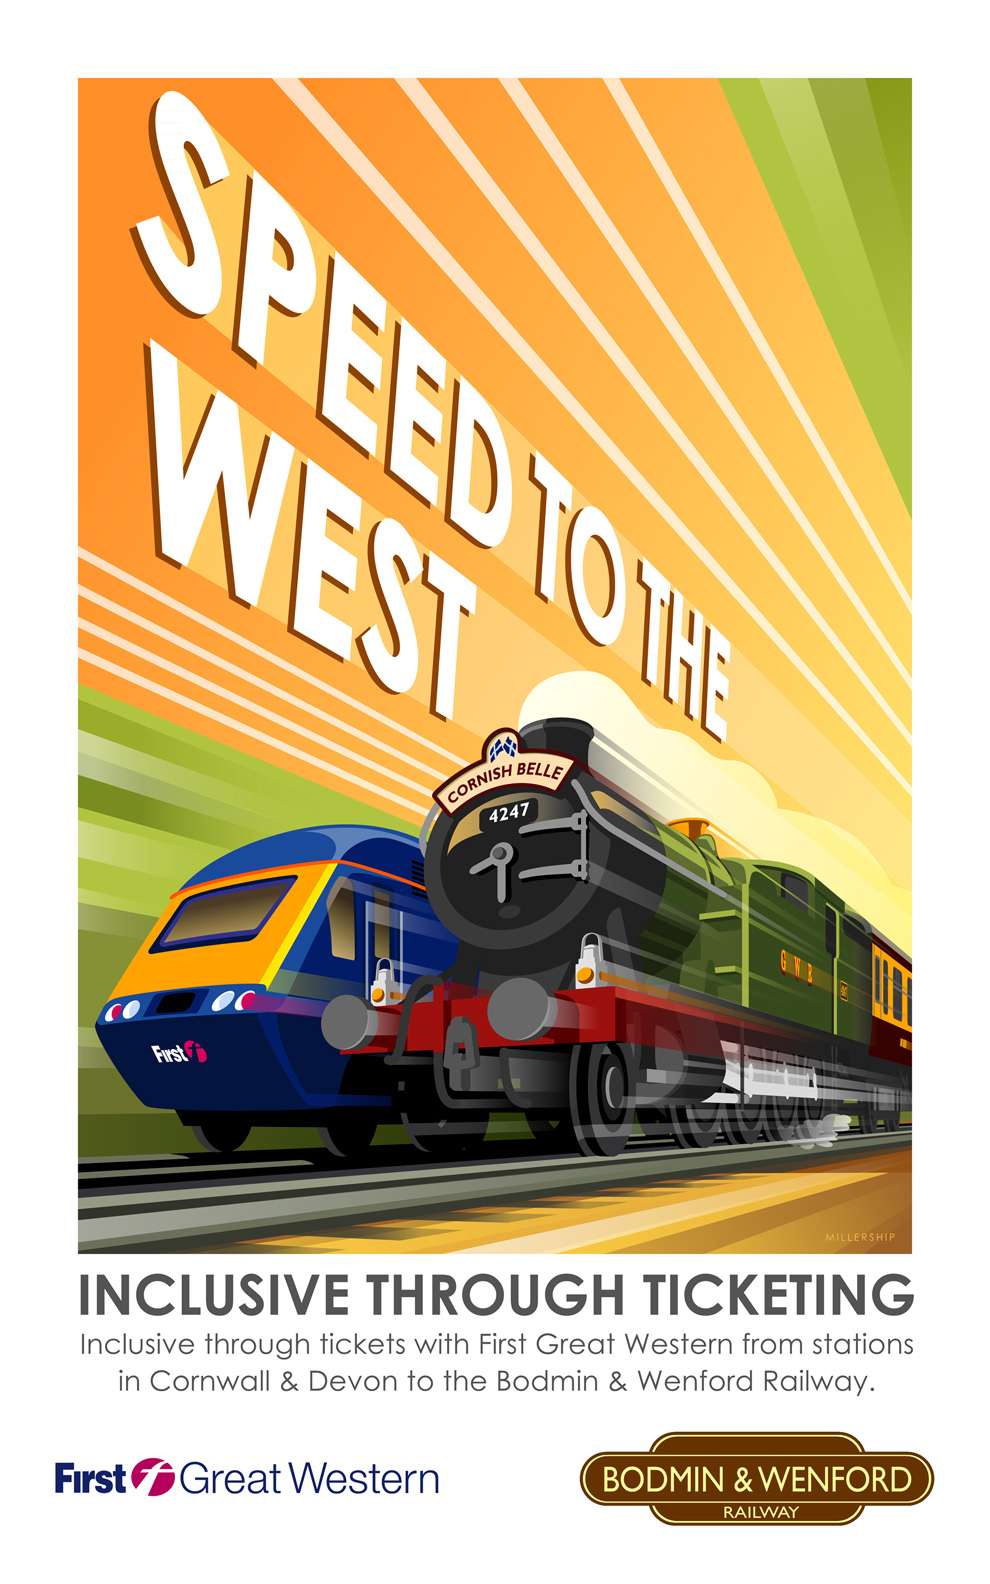 Stephen  Millership, Illustration of a train in a travel poster retro style 